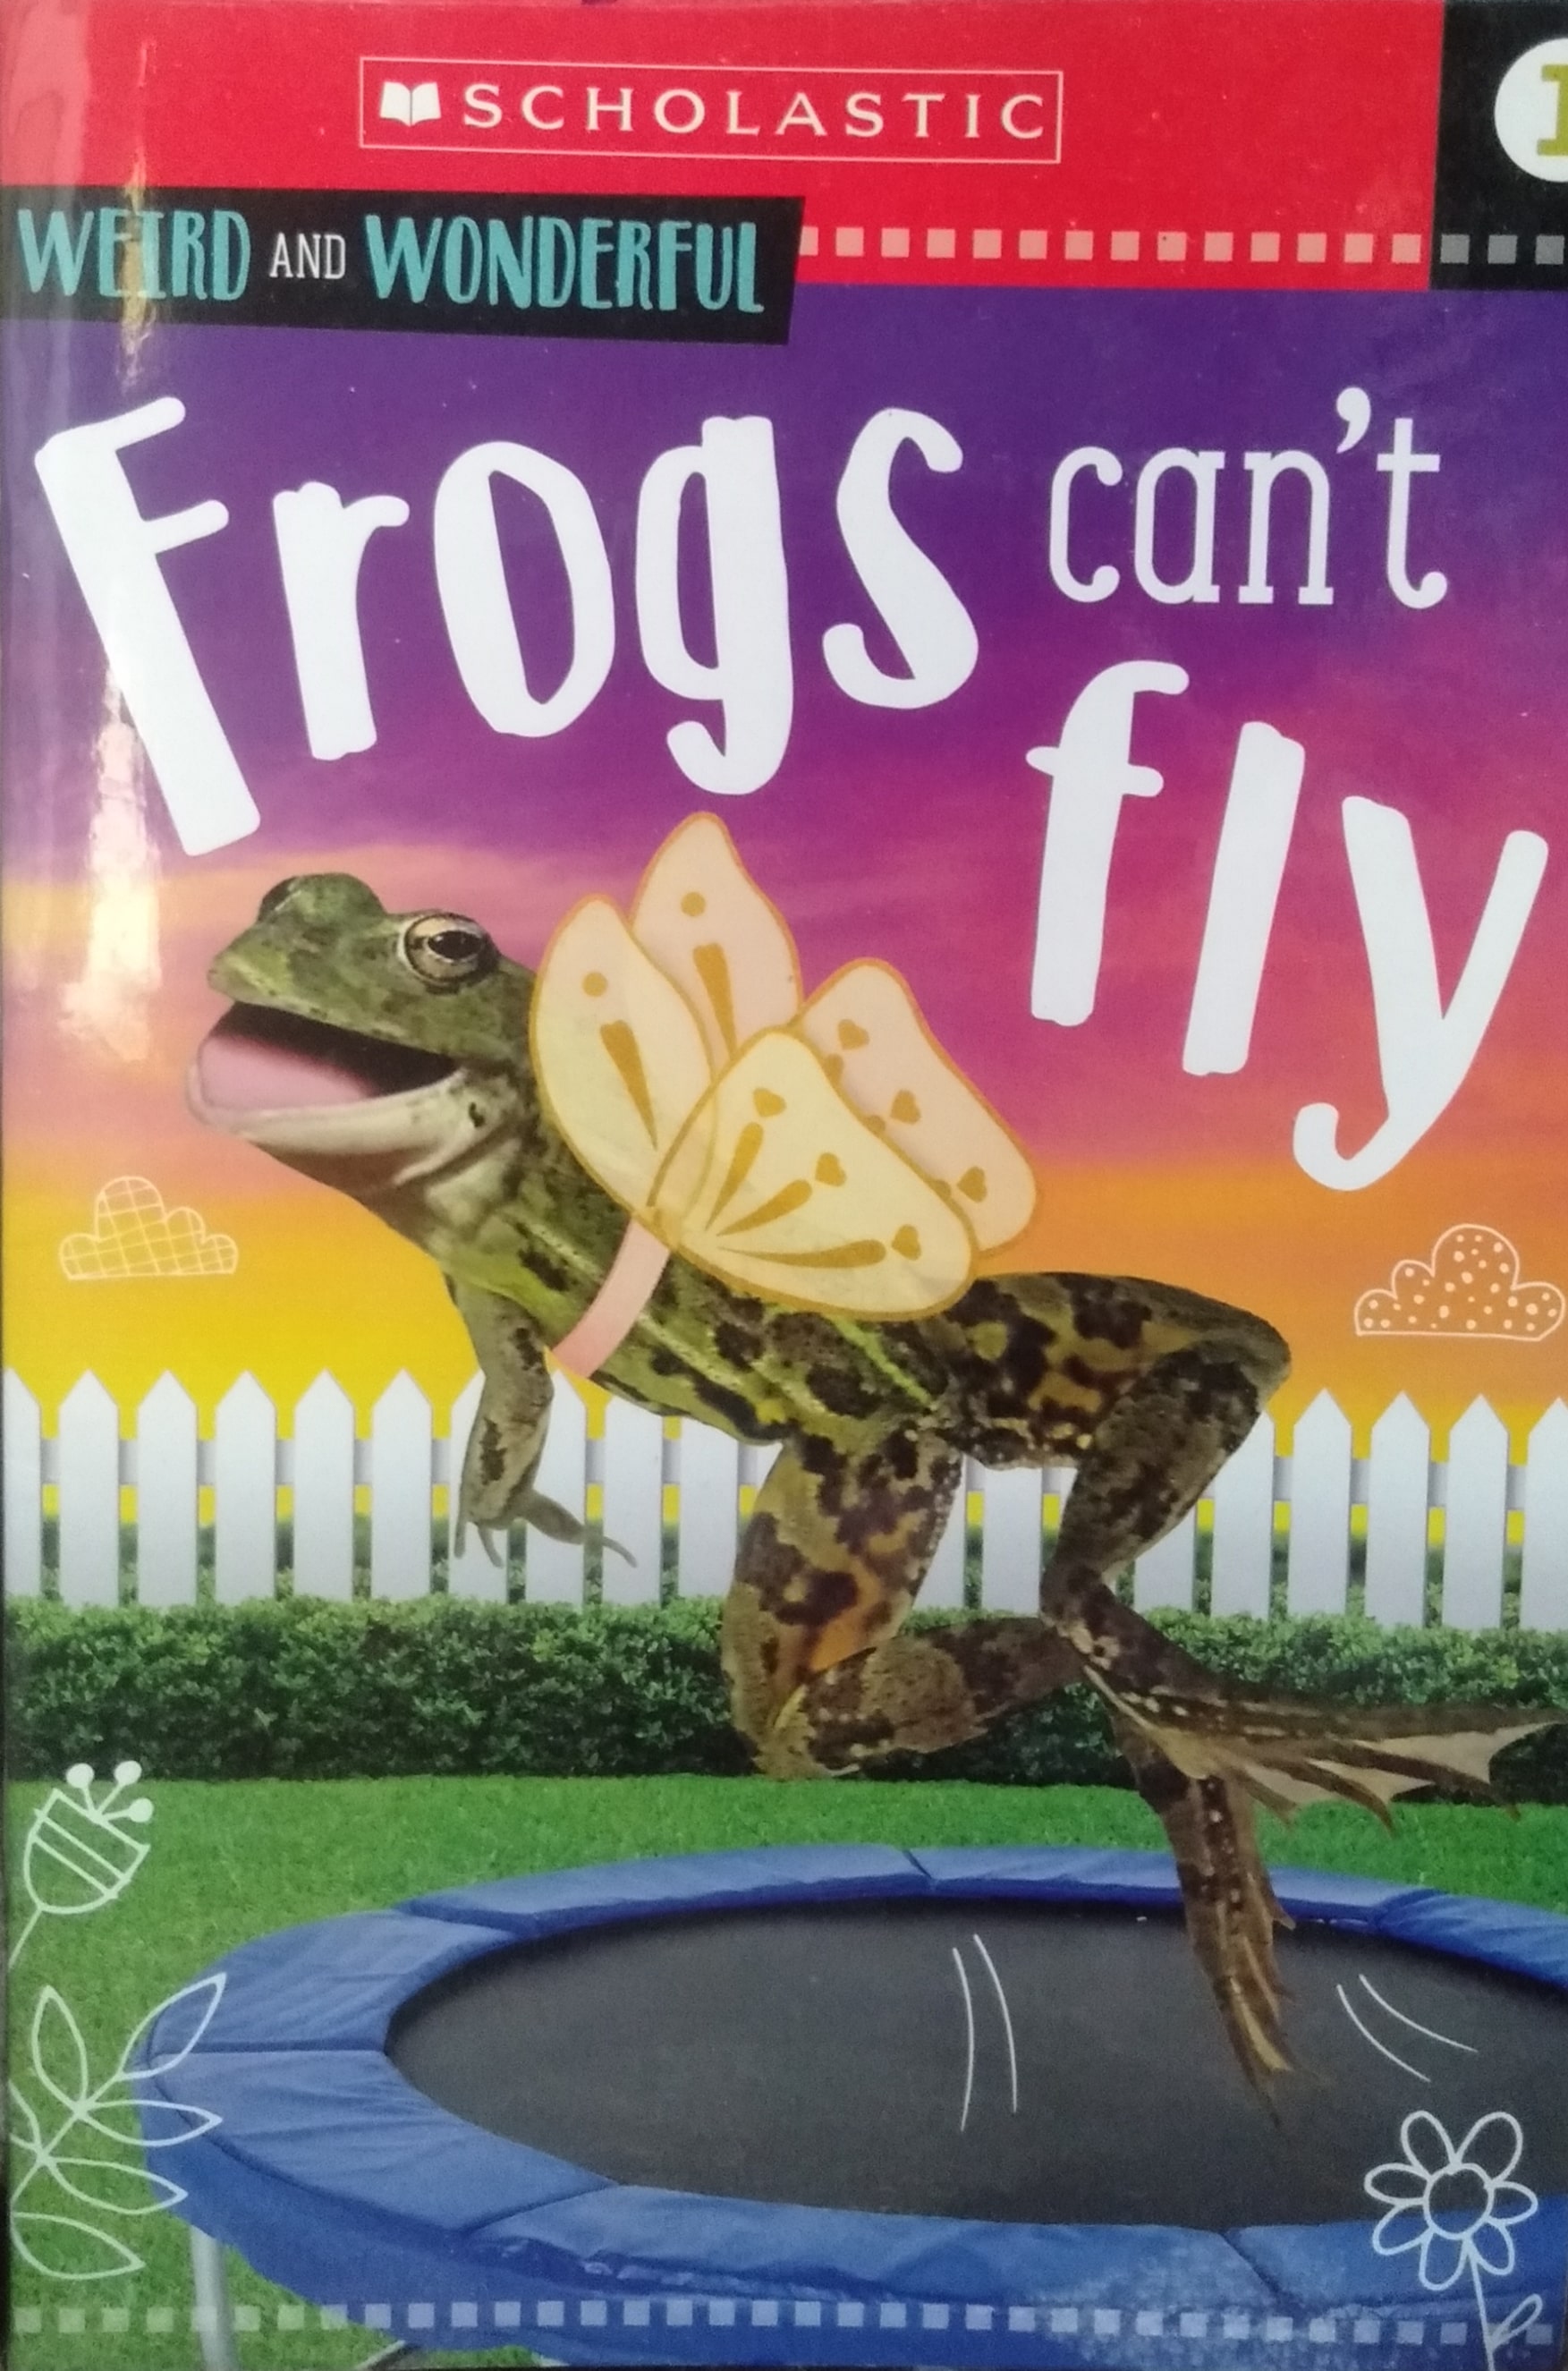 IMG : Animal Antics Weird and Wonderful Frogs cant fly